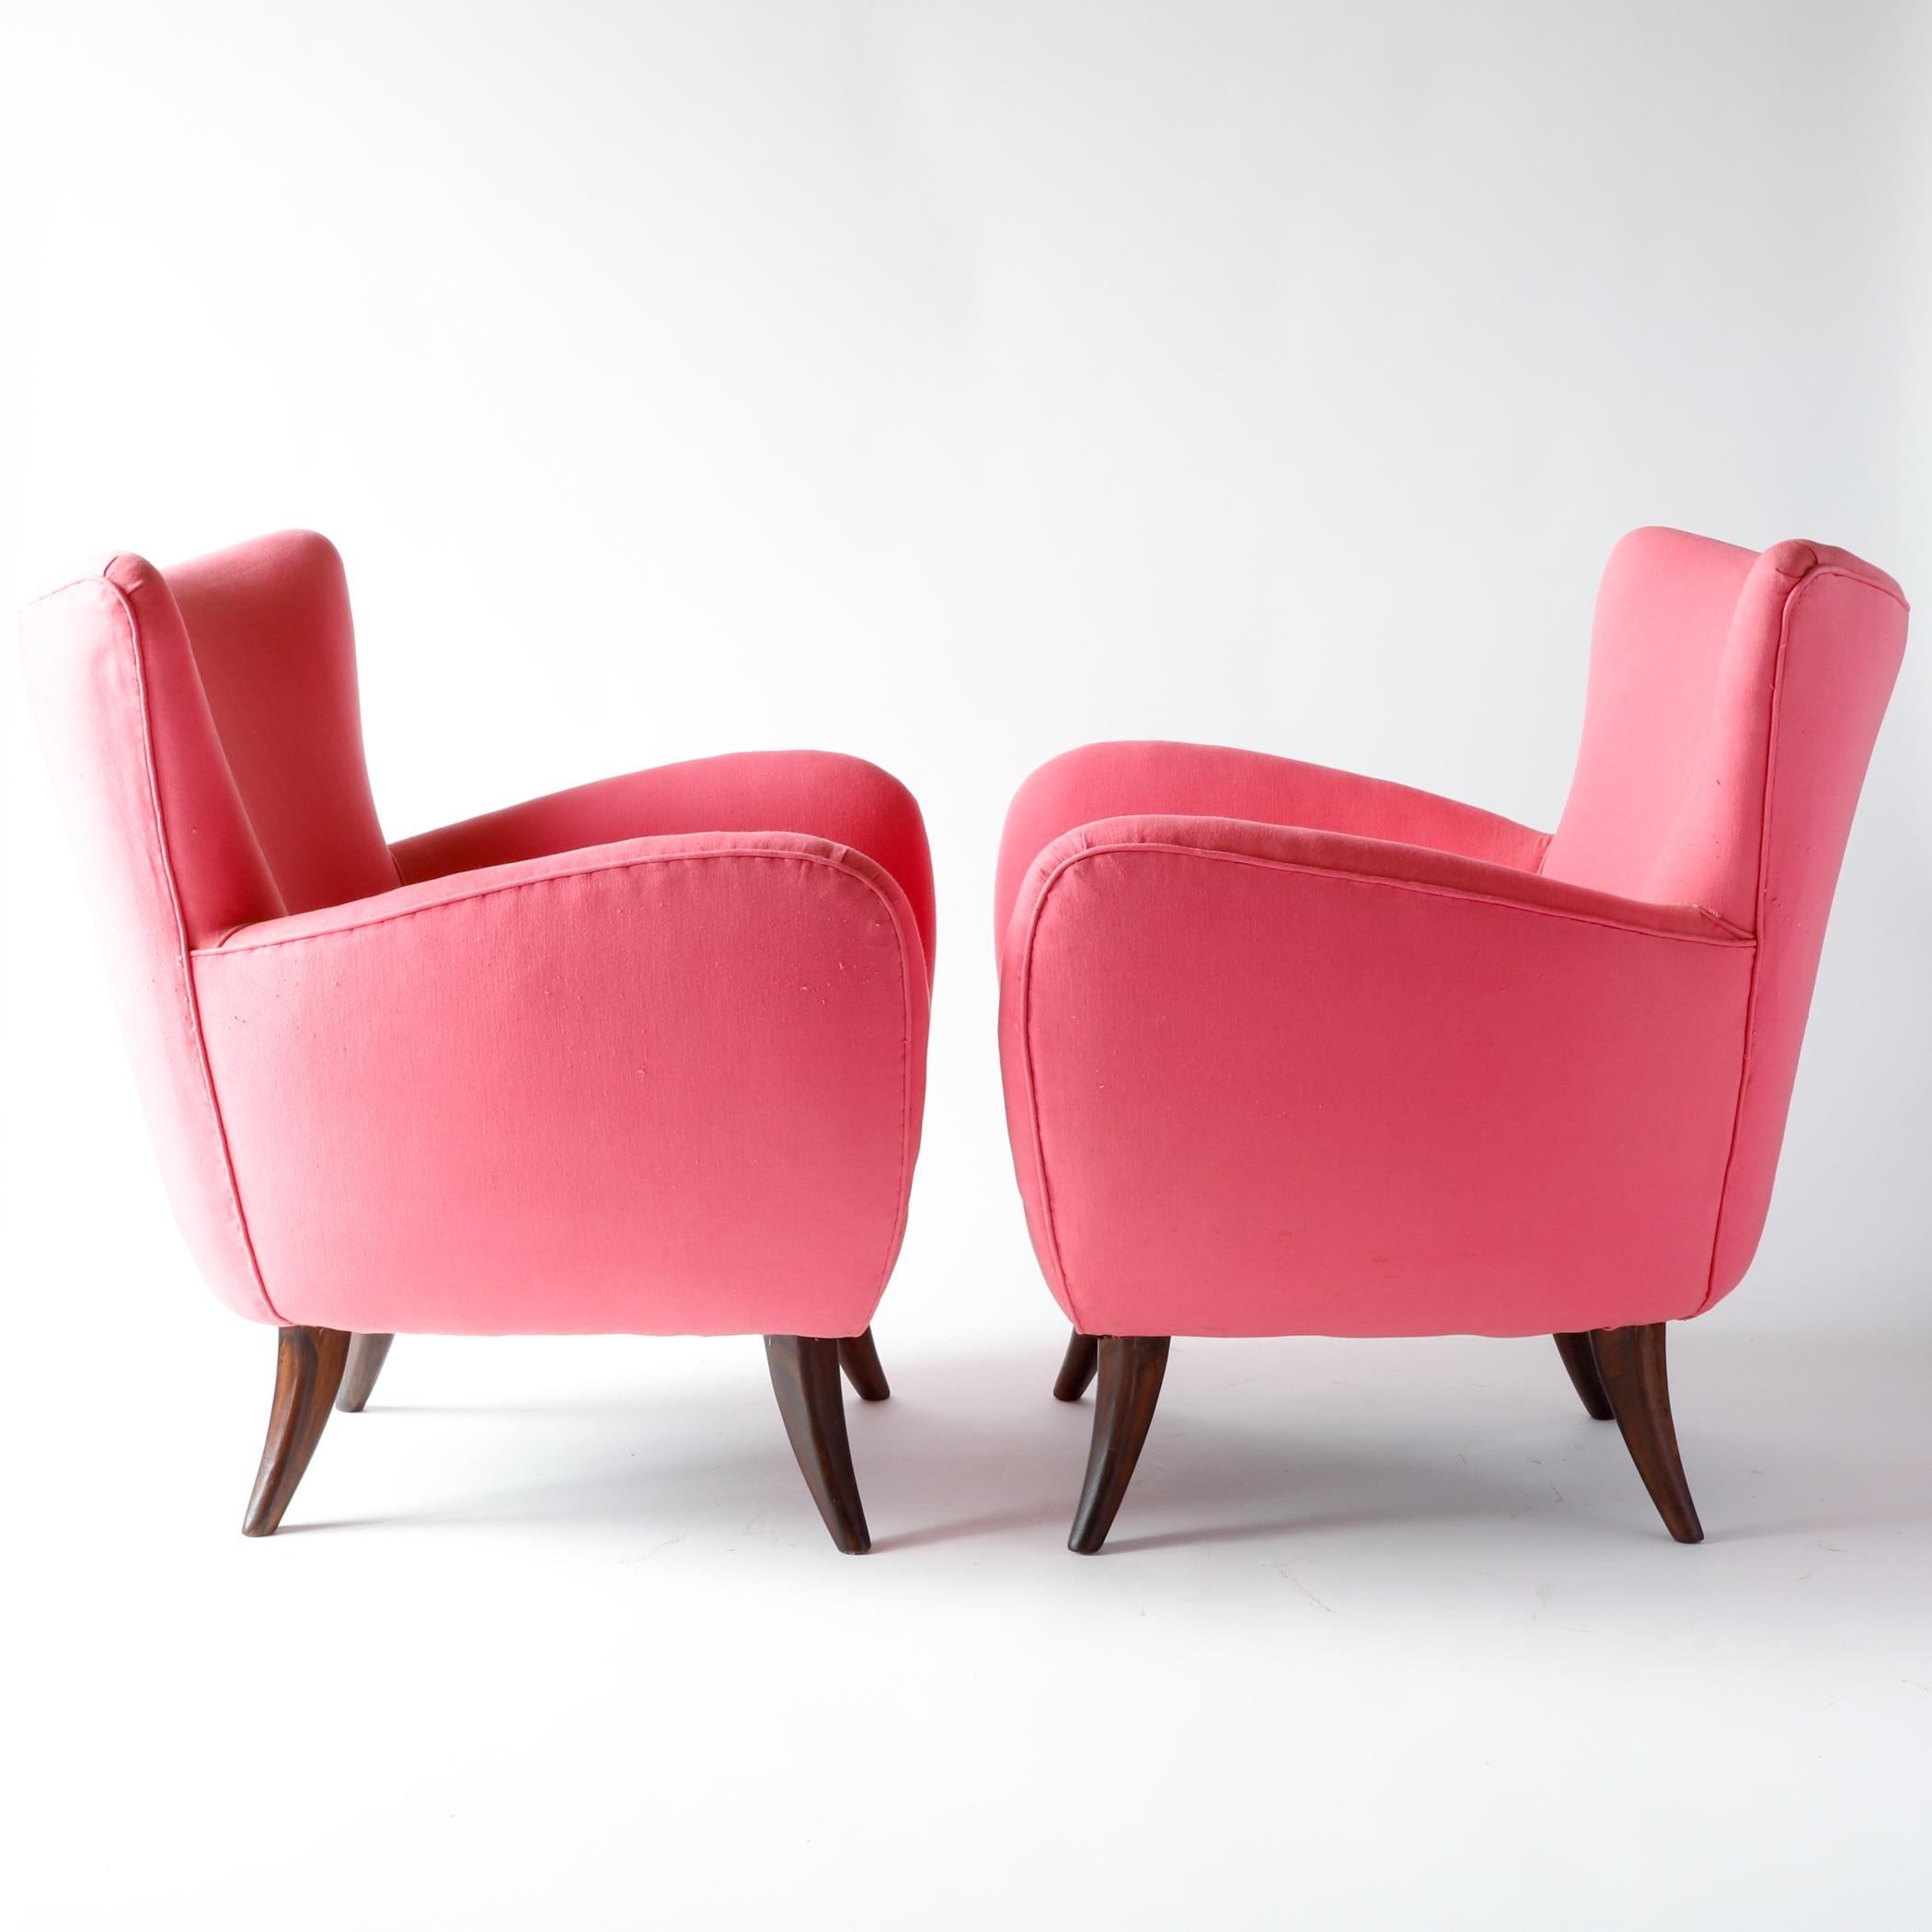 American Pair of Ernst Schwadron Upholstered Lounge Chairs, 1940s, Bright Pink For Sale